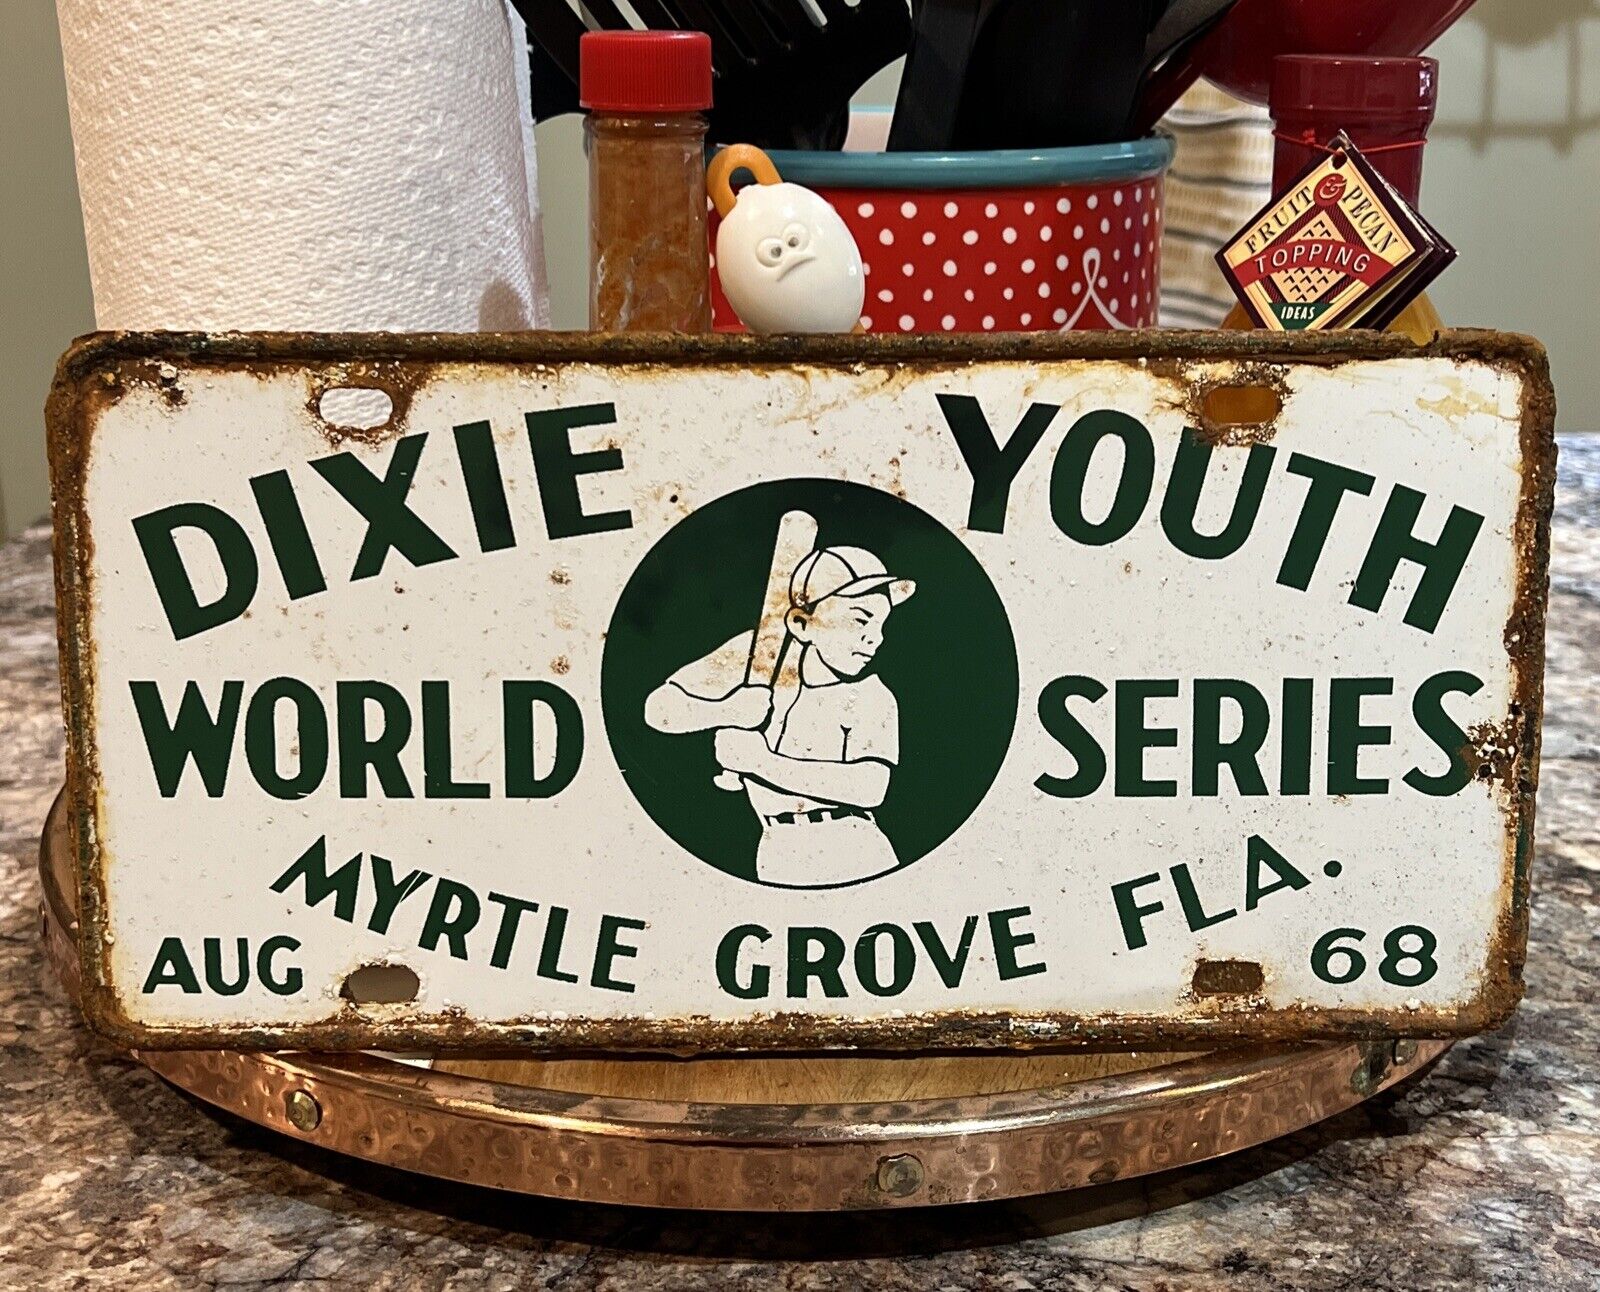 Dixie Youth World Series 1968 Booster License Plate Myrtle Grove Florida 1968